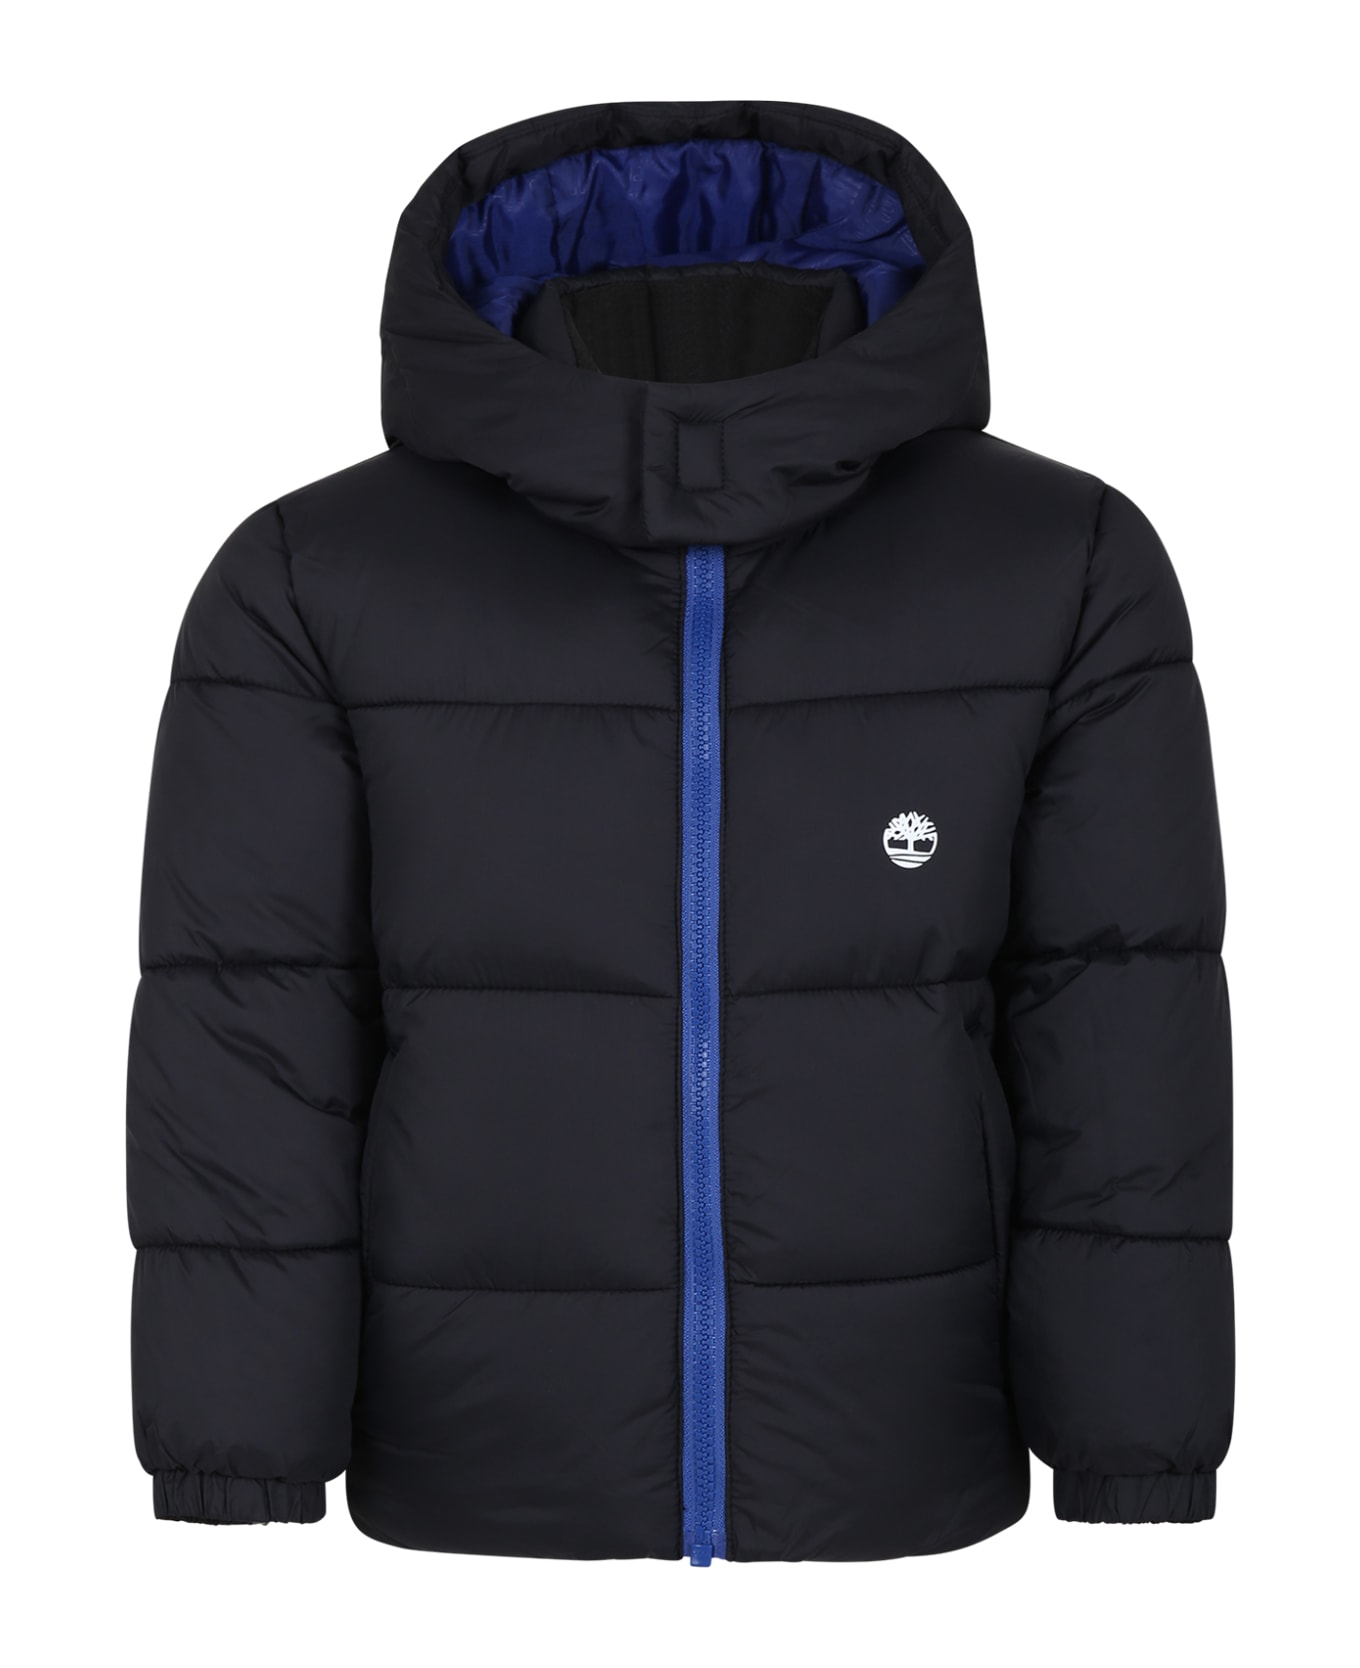 Timberland Black Down Jacket For Boy With Tree - Black コート＆ジャケット